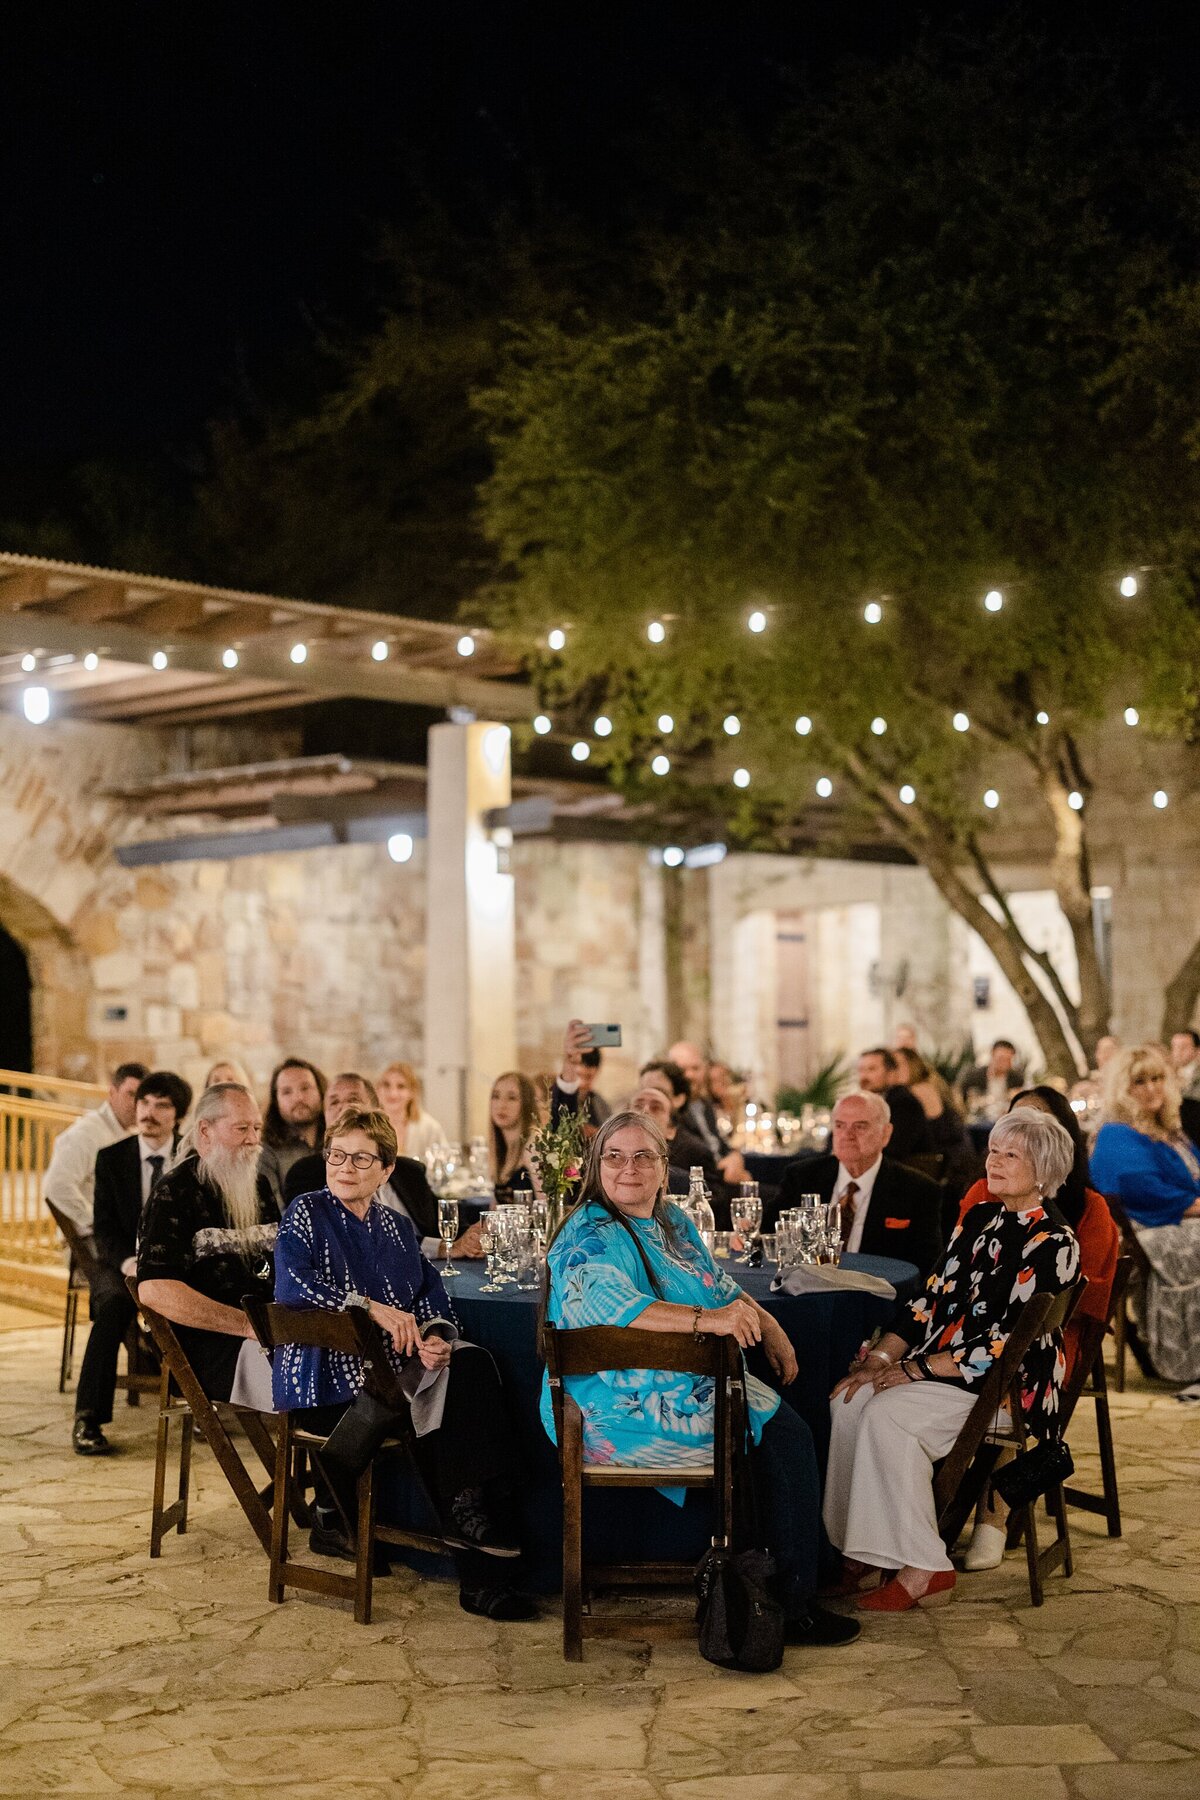 A shot of wedding guests sitting at their reception tables and watching the bride and groom during their first dance during their wedding reception at the Lady Bird Johnson Wildflower Center in Austin, Texas. The guests are all captivated by what's happening out of frame and the scene is framed by many rows of cafe lights criss crossing above them.